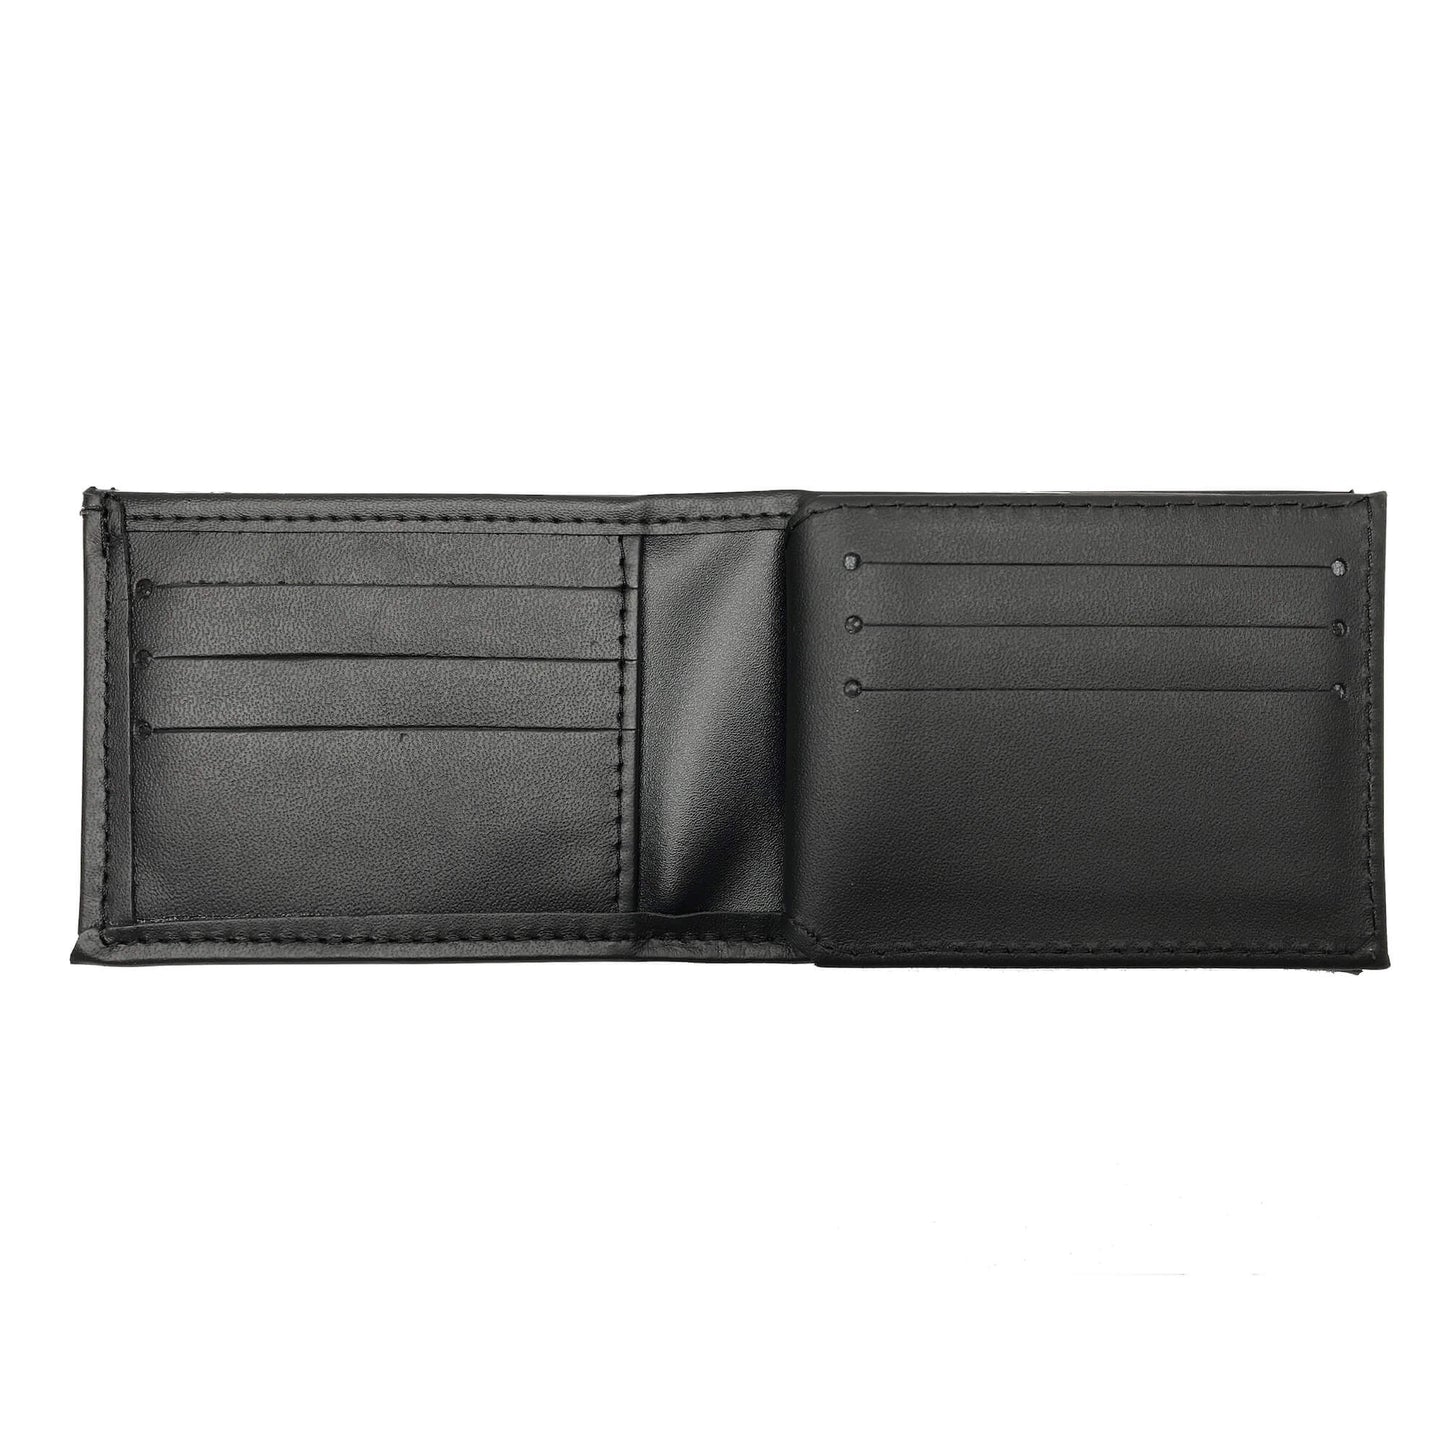 U.S. Immigration and Customs Enforcement - ICE (2.5in) Horizontal Bifold Hidden Badge Wallet-Perfect Fit-911 Duty Gear USA